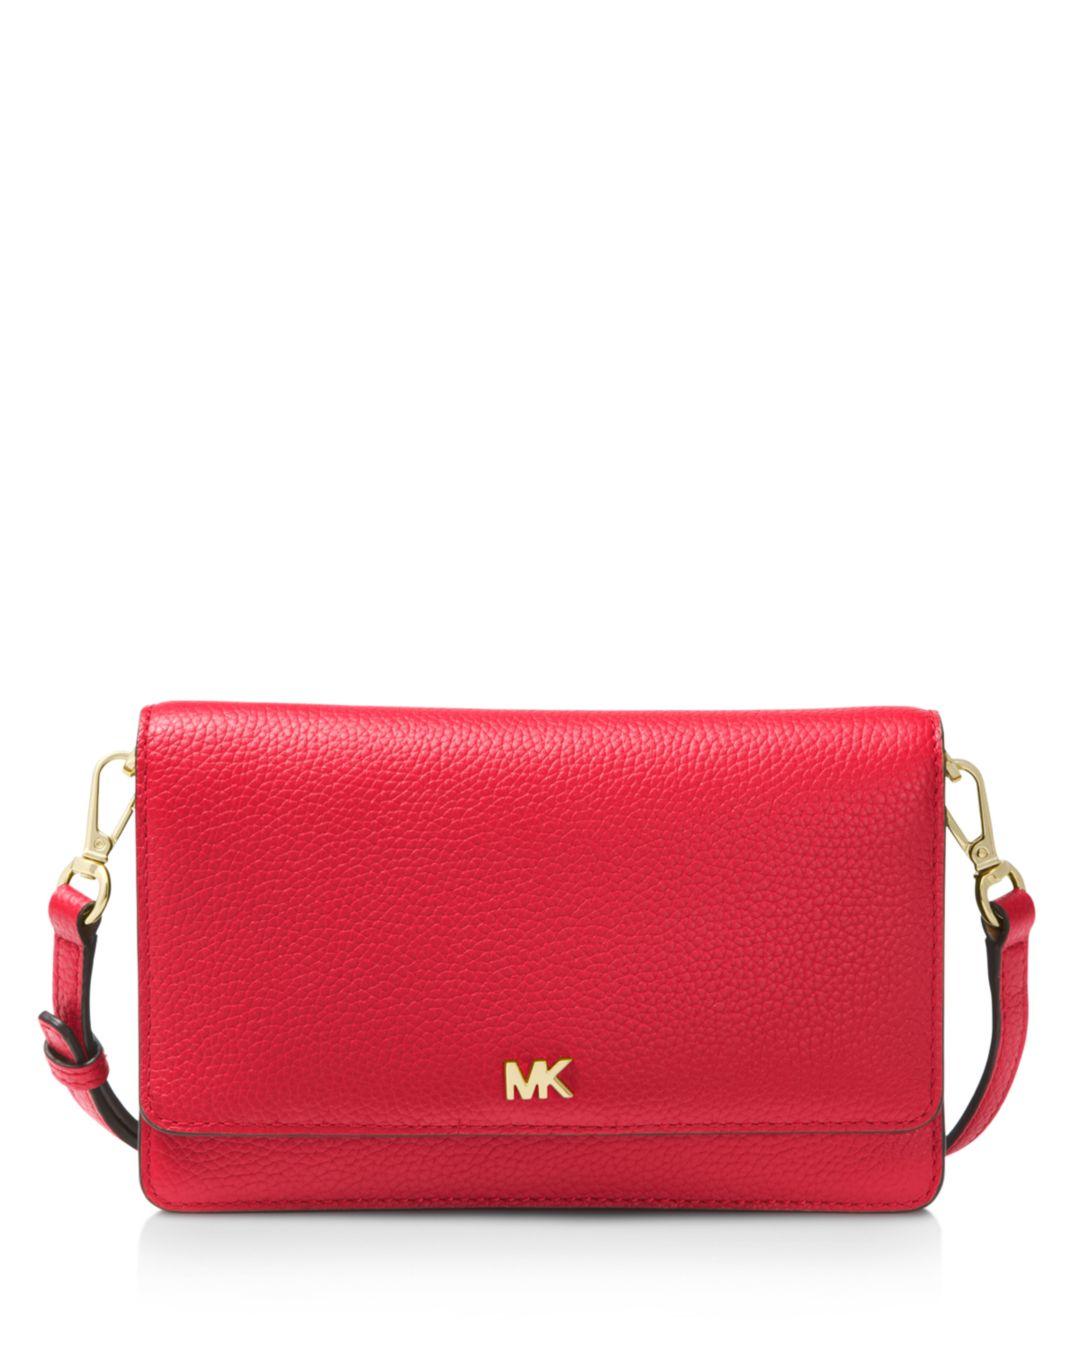 Lyst - Michael Kors Leather Smartphone Crossbody in Red - Save 18%